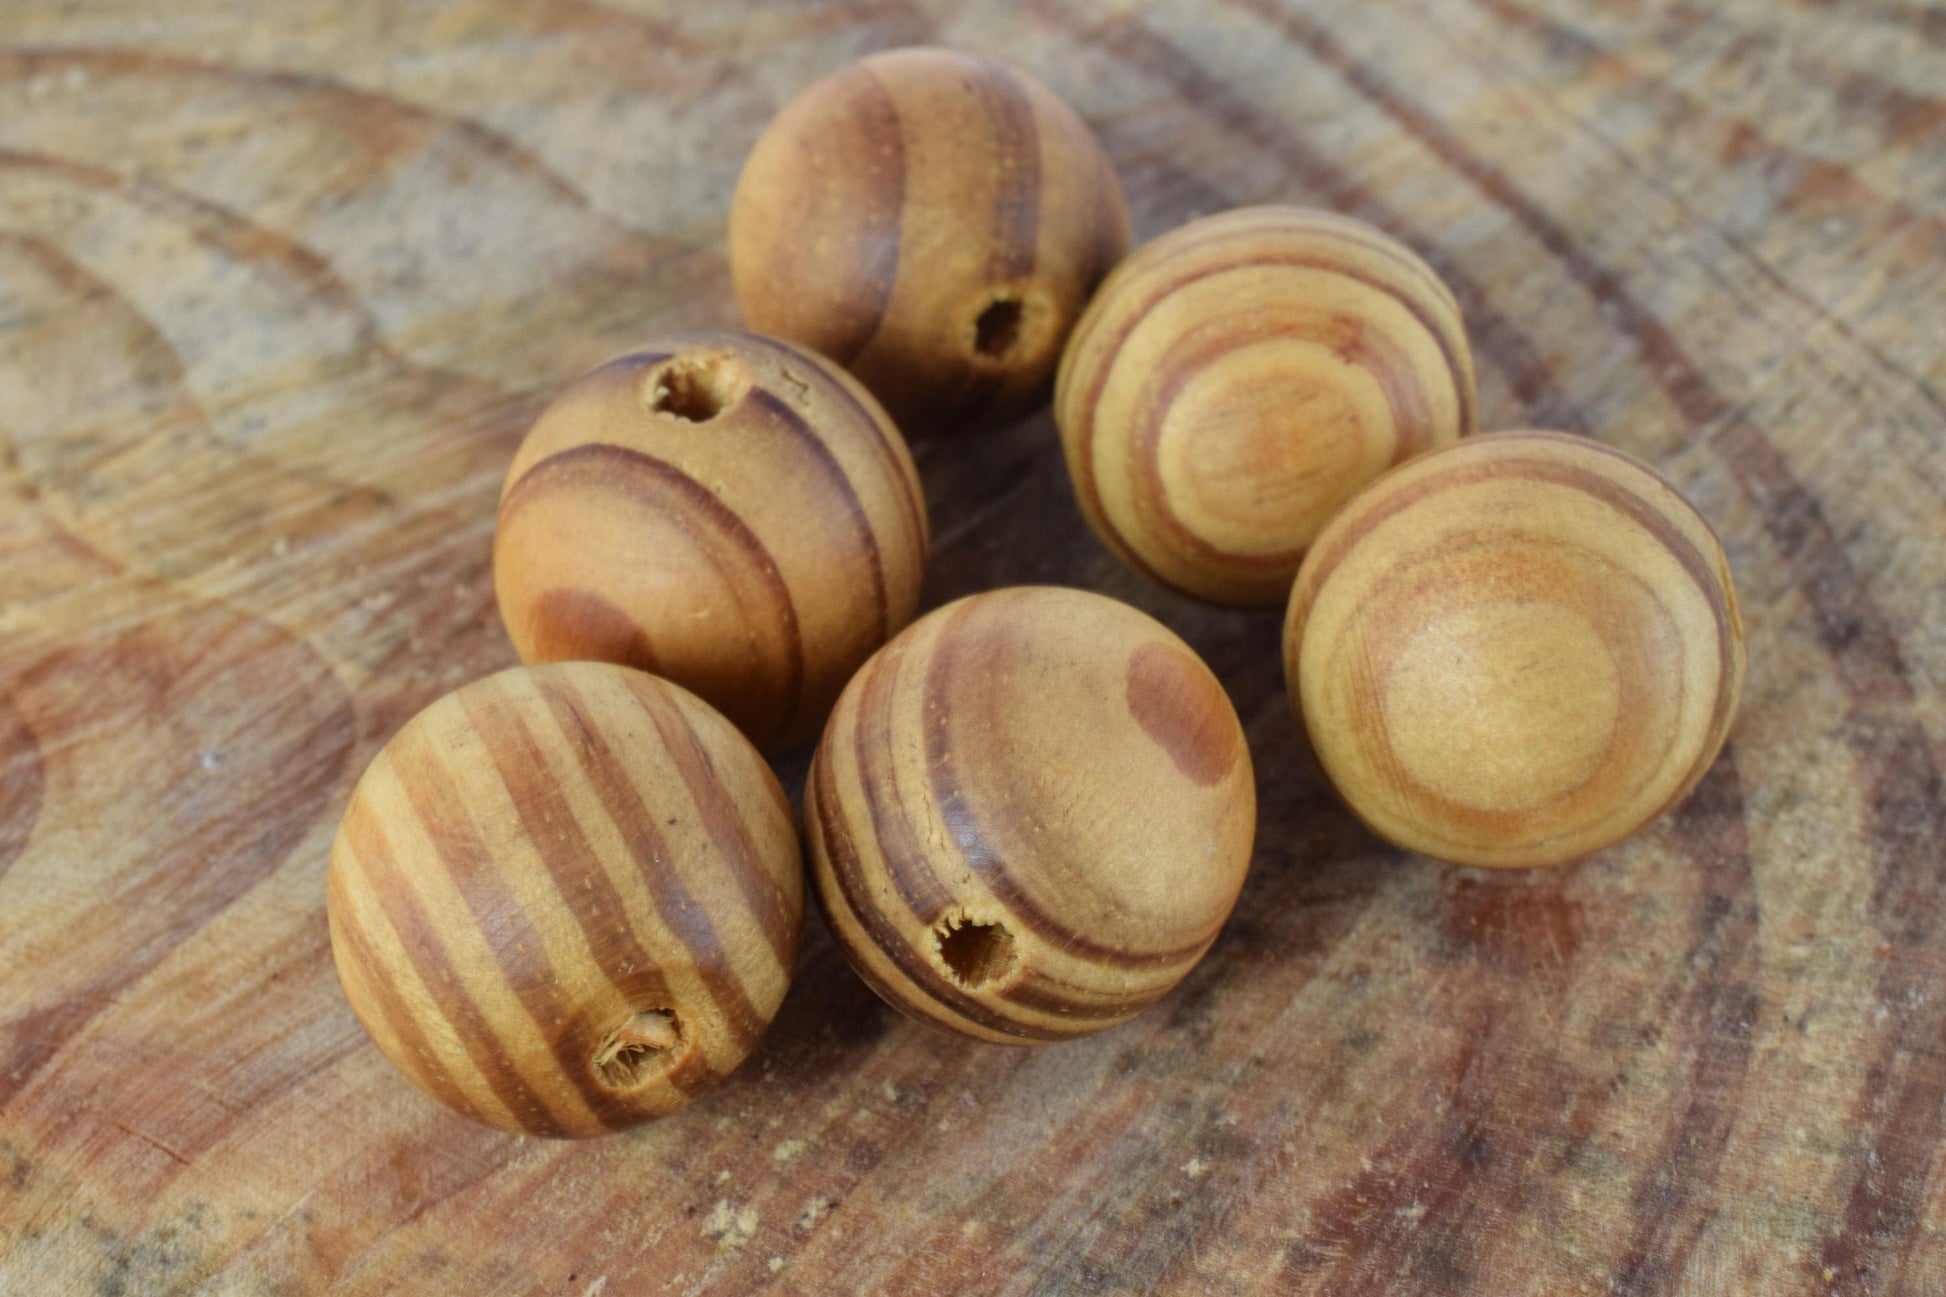 17mm Round Wooden Beads, Sold by 6pcs, High Quality Wood Beads,Raw Finished Wood Beads,Wood Craft Beads,Loose Wooden Beads,Nursing Necklace